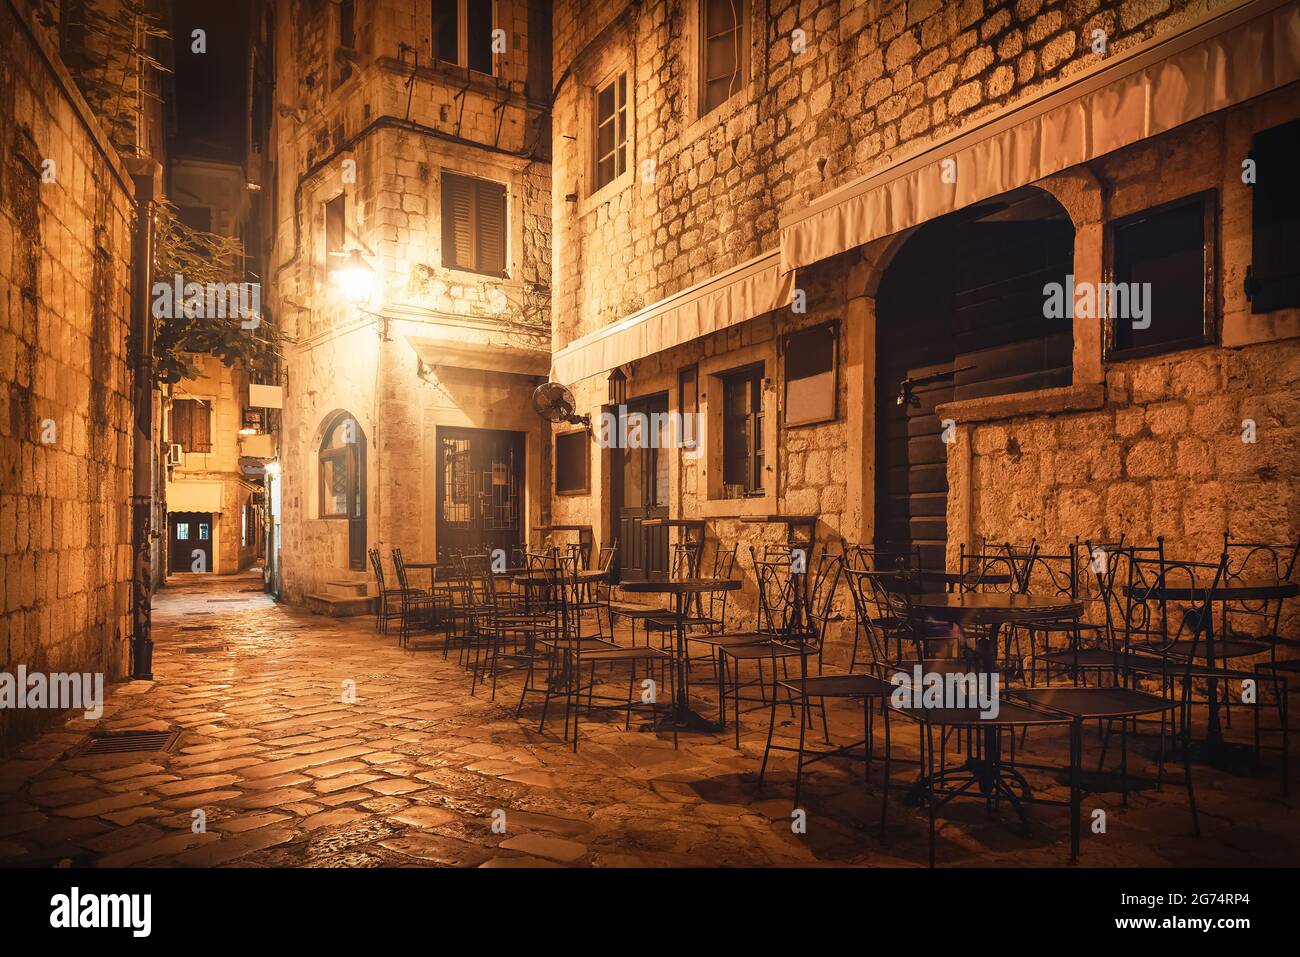 Street cafe in Old Town of Kotor at night Stock Photo